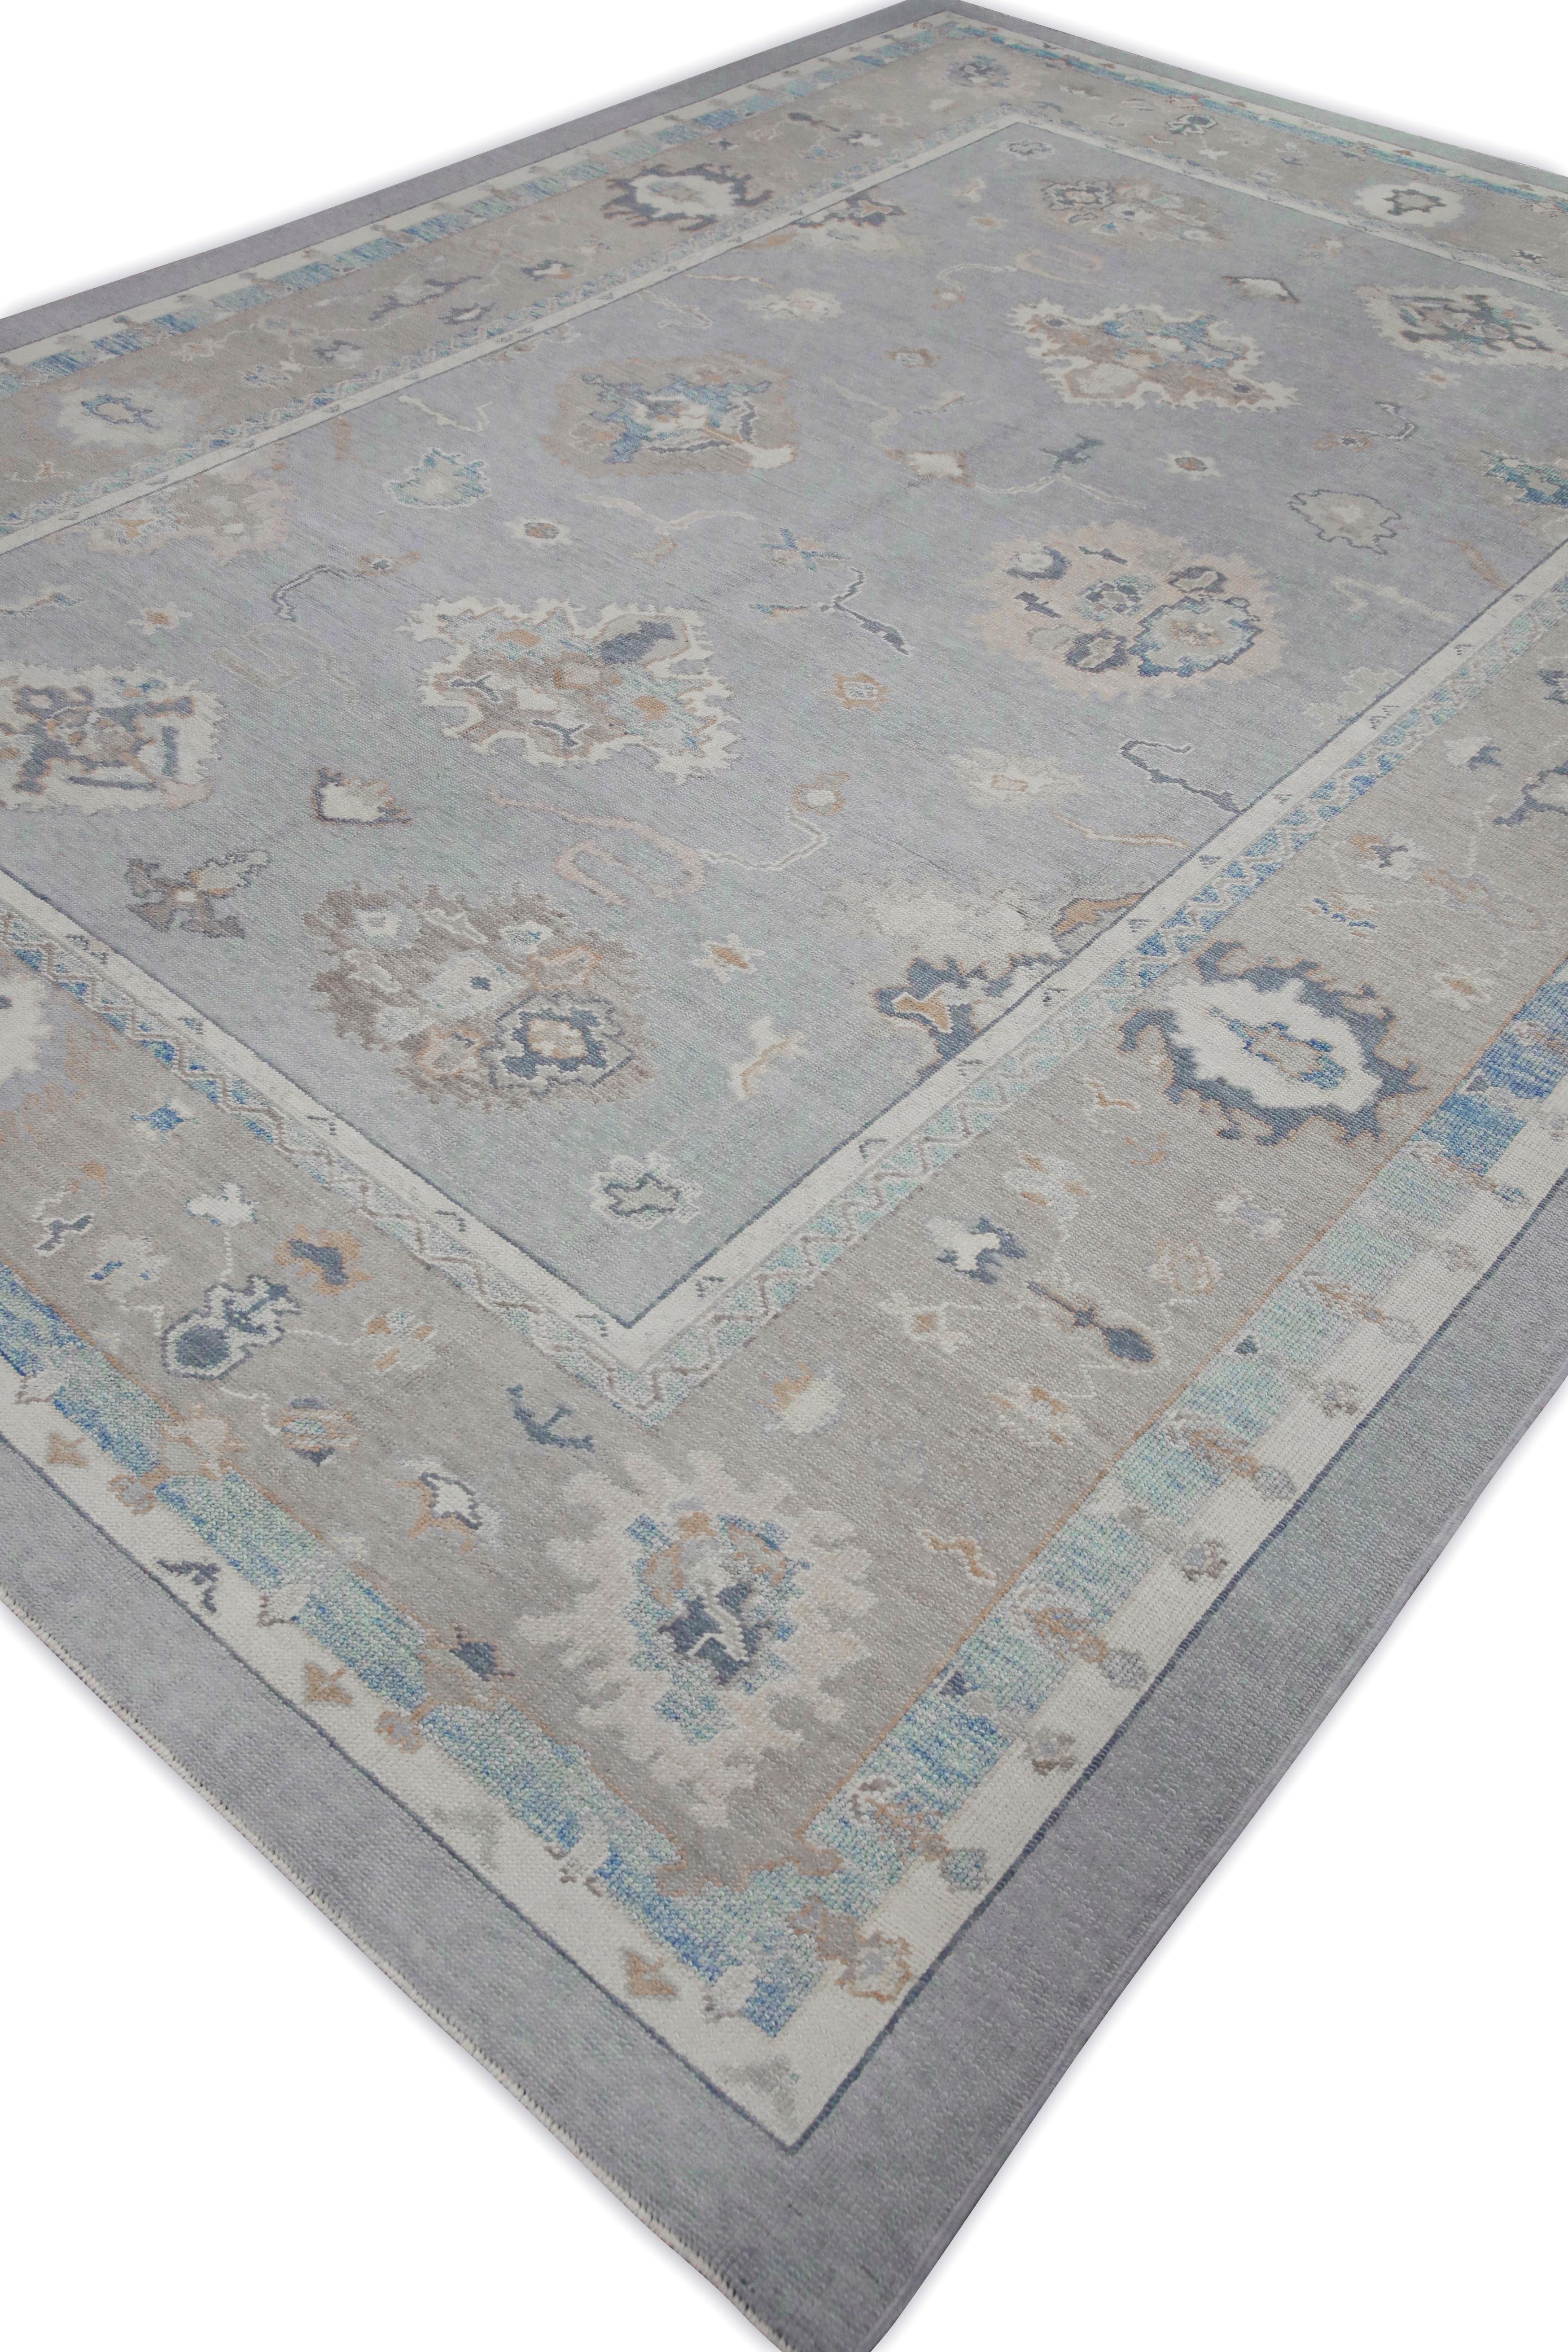 Contemporary Blue & Taupe Floral Design Handwoven Wool Turkish Oushak Rug 9'9